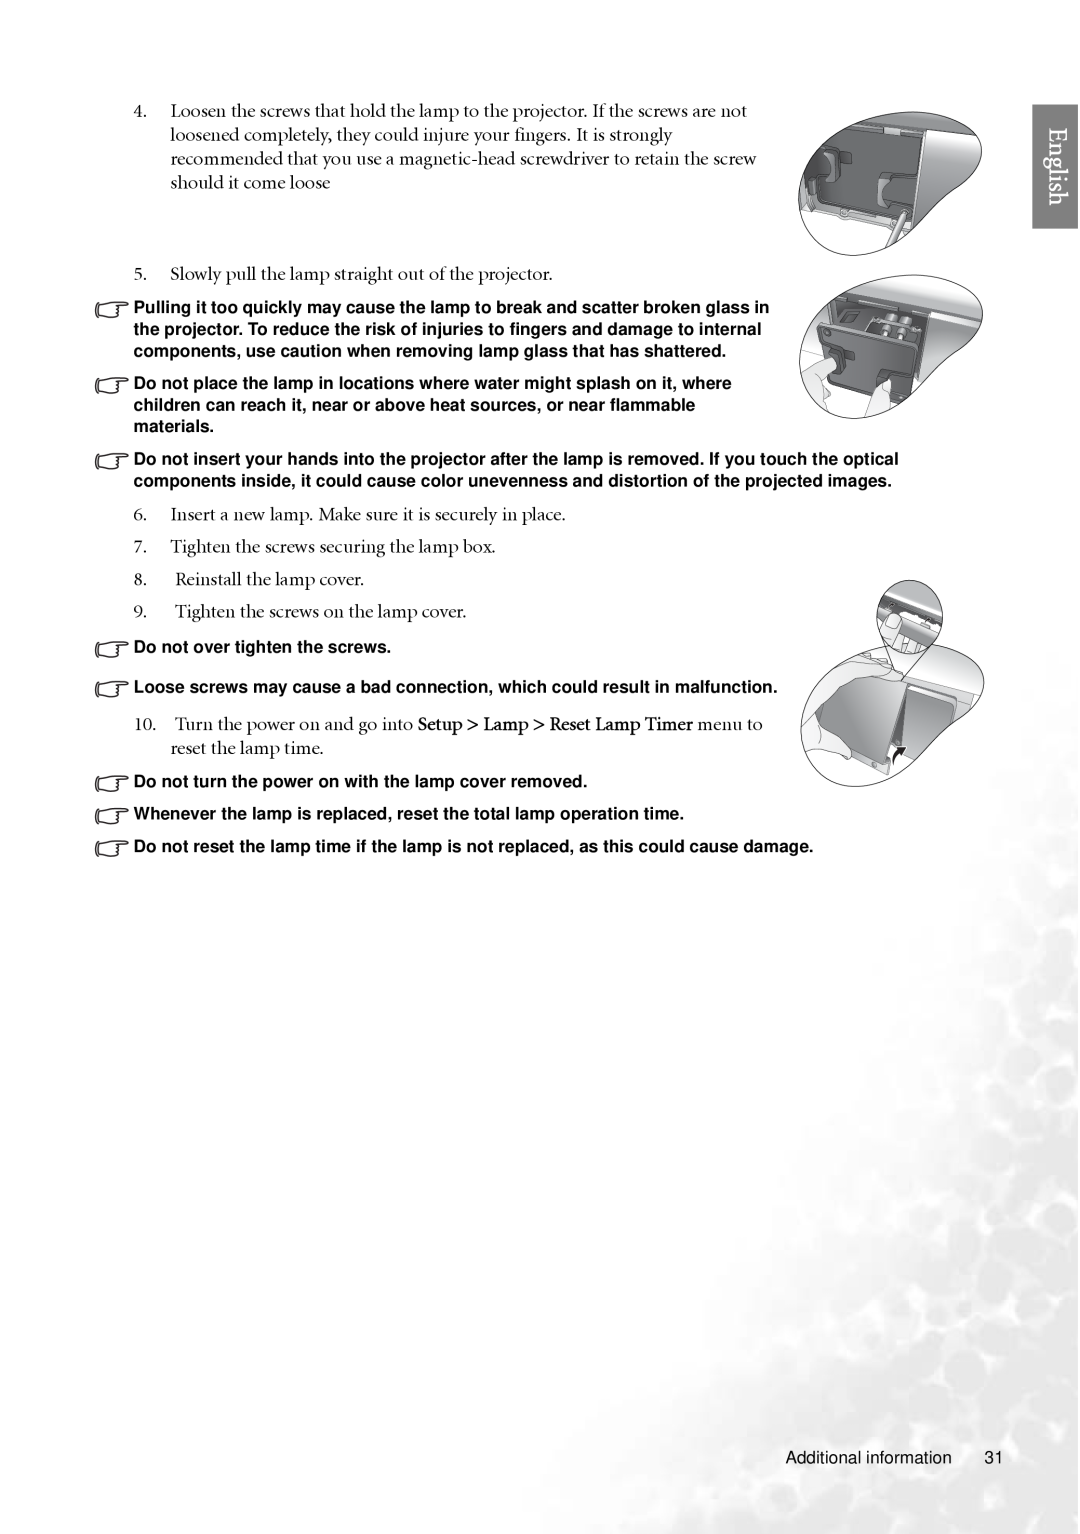 BenQ PE7700 user manual English, Slowly pull the lamp straight out of the projector 